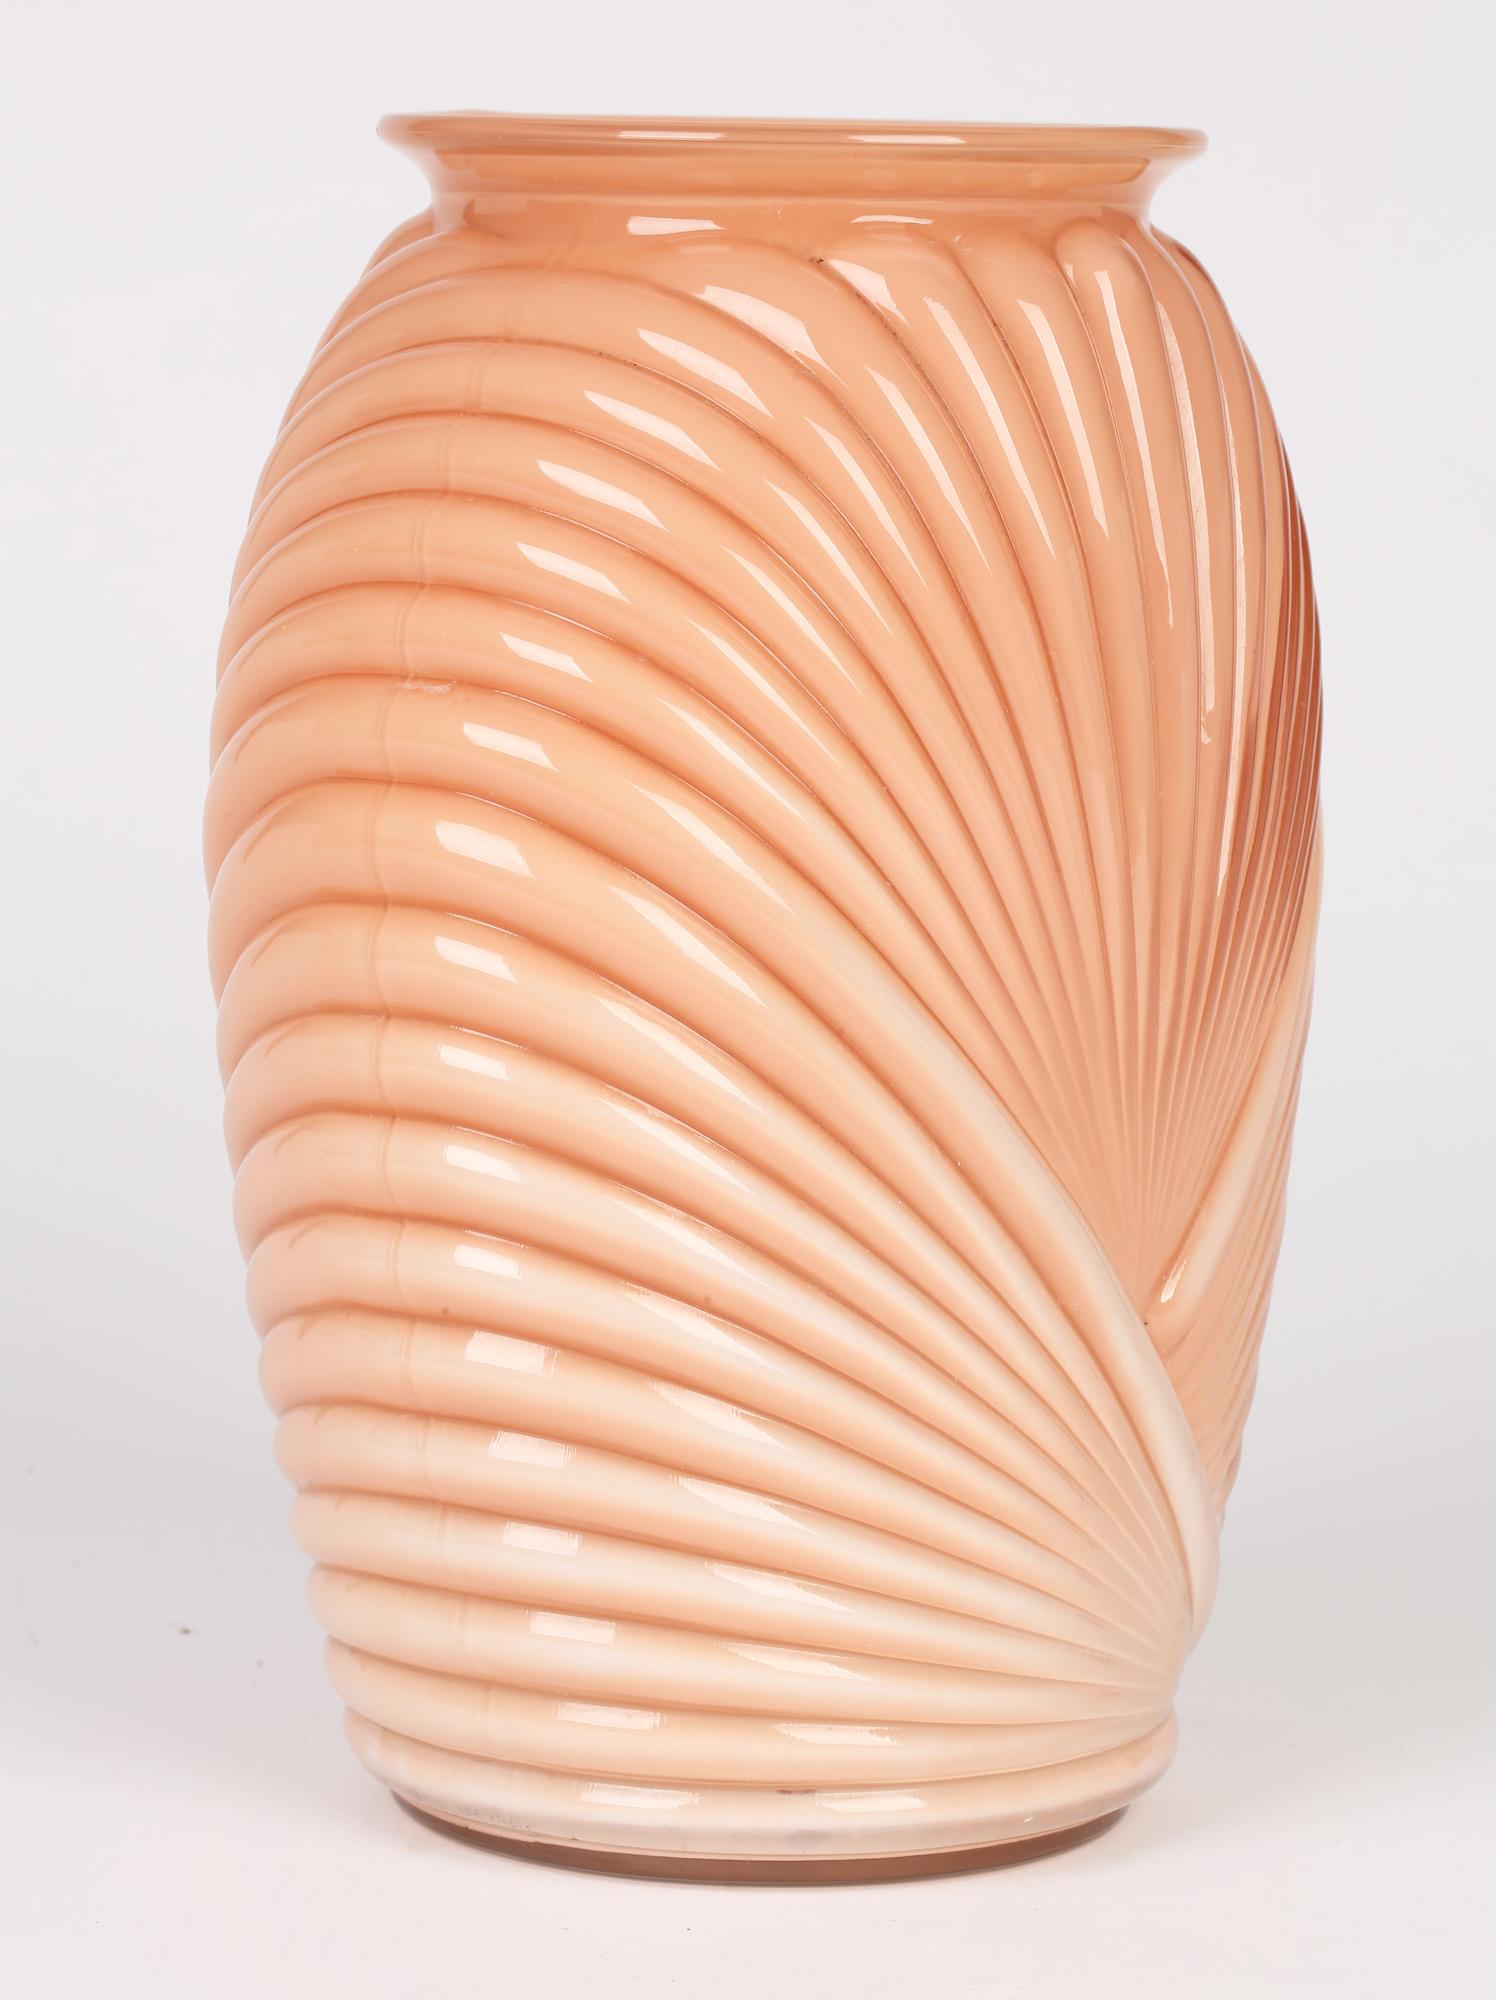 Anchor Hocking Art Deco Style Salmon Pink Molded Fan Pattern Glass Vase For Sale 5